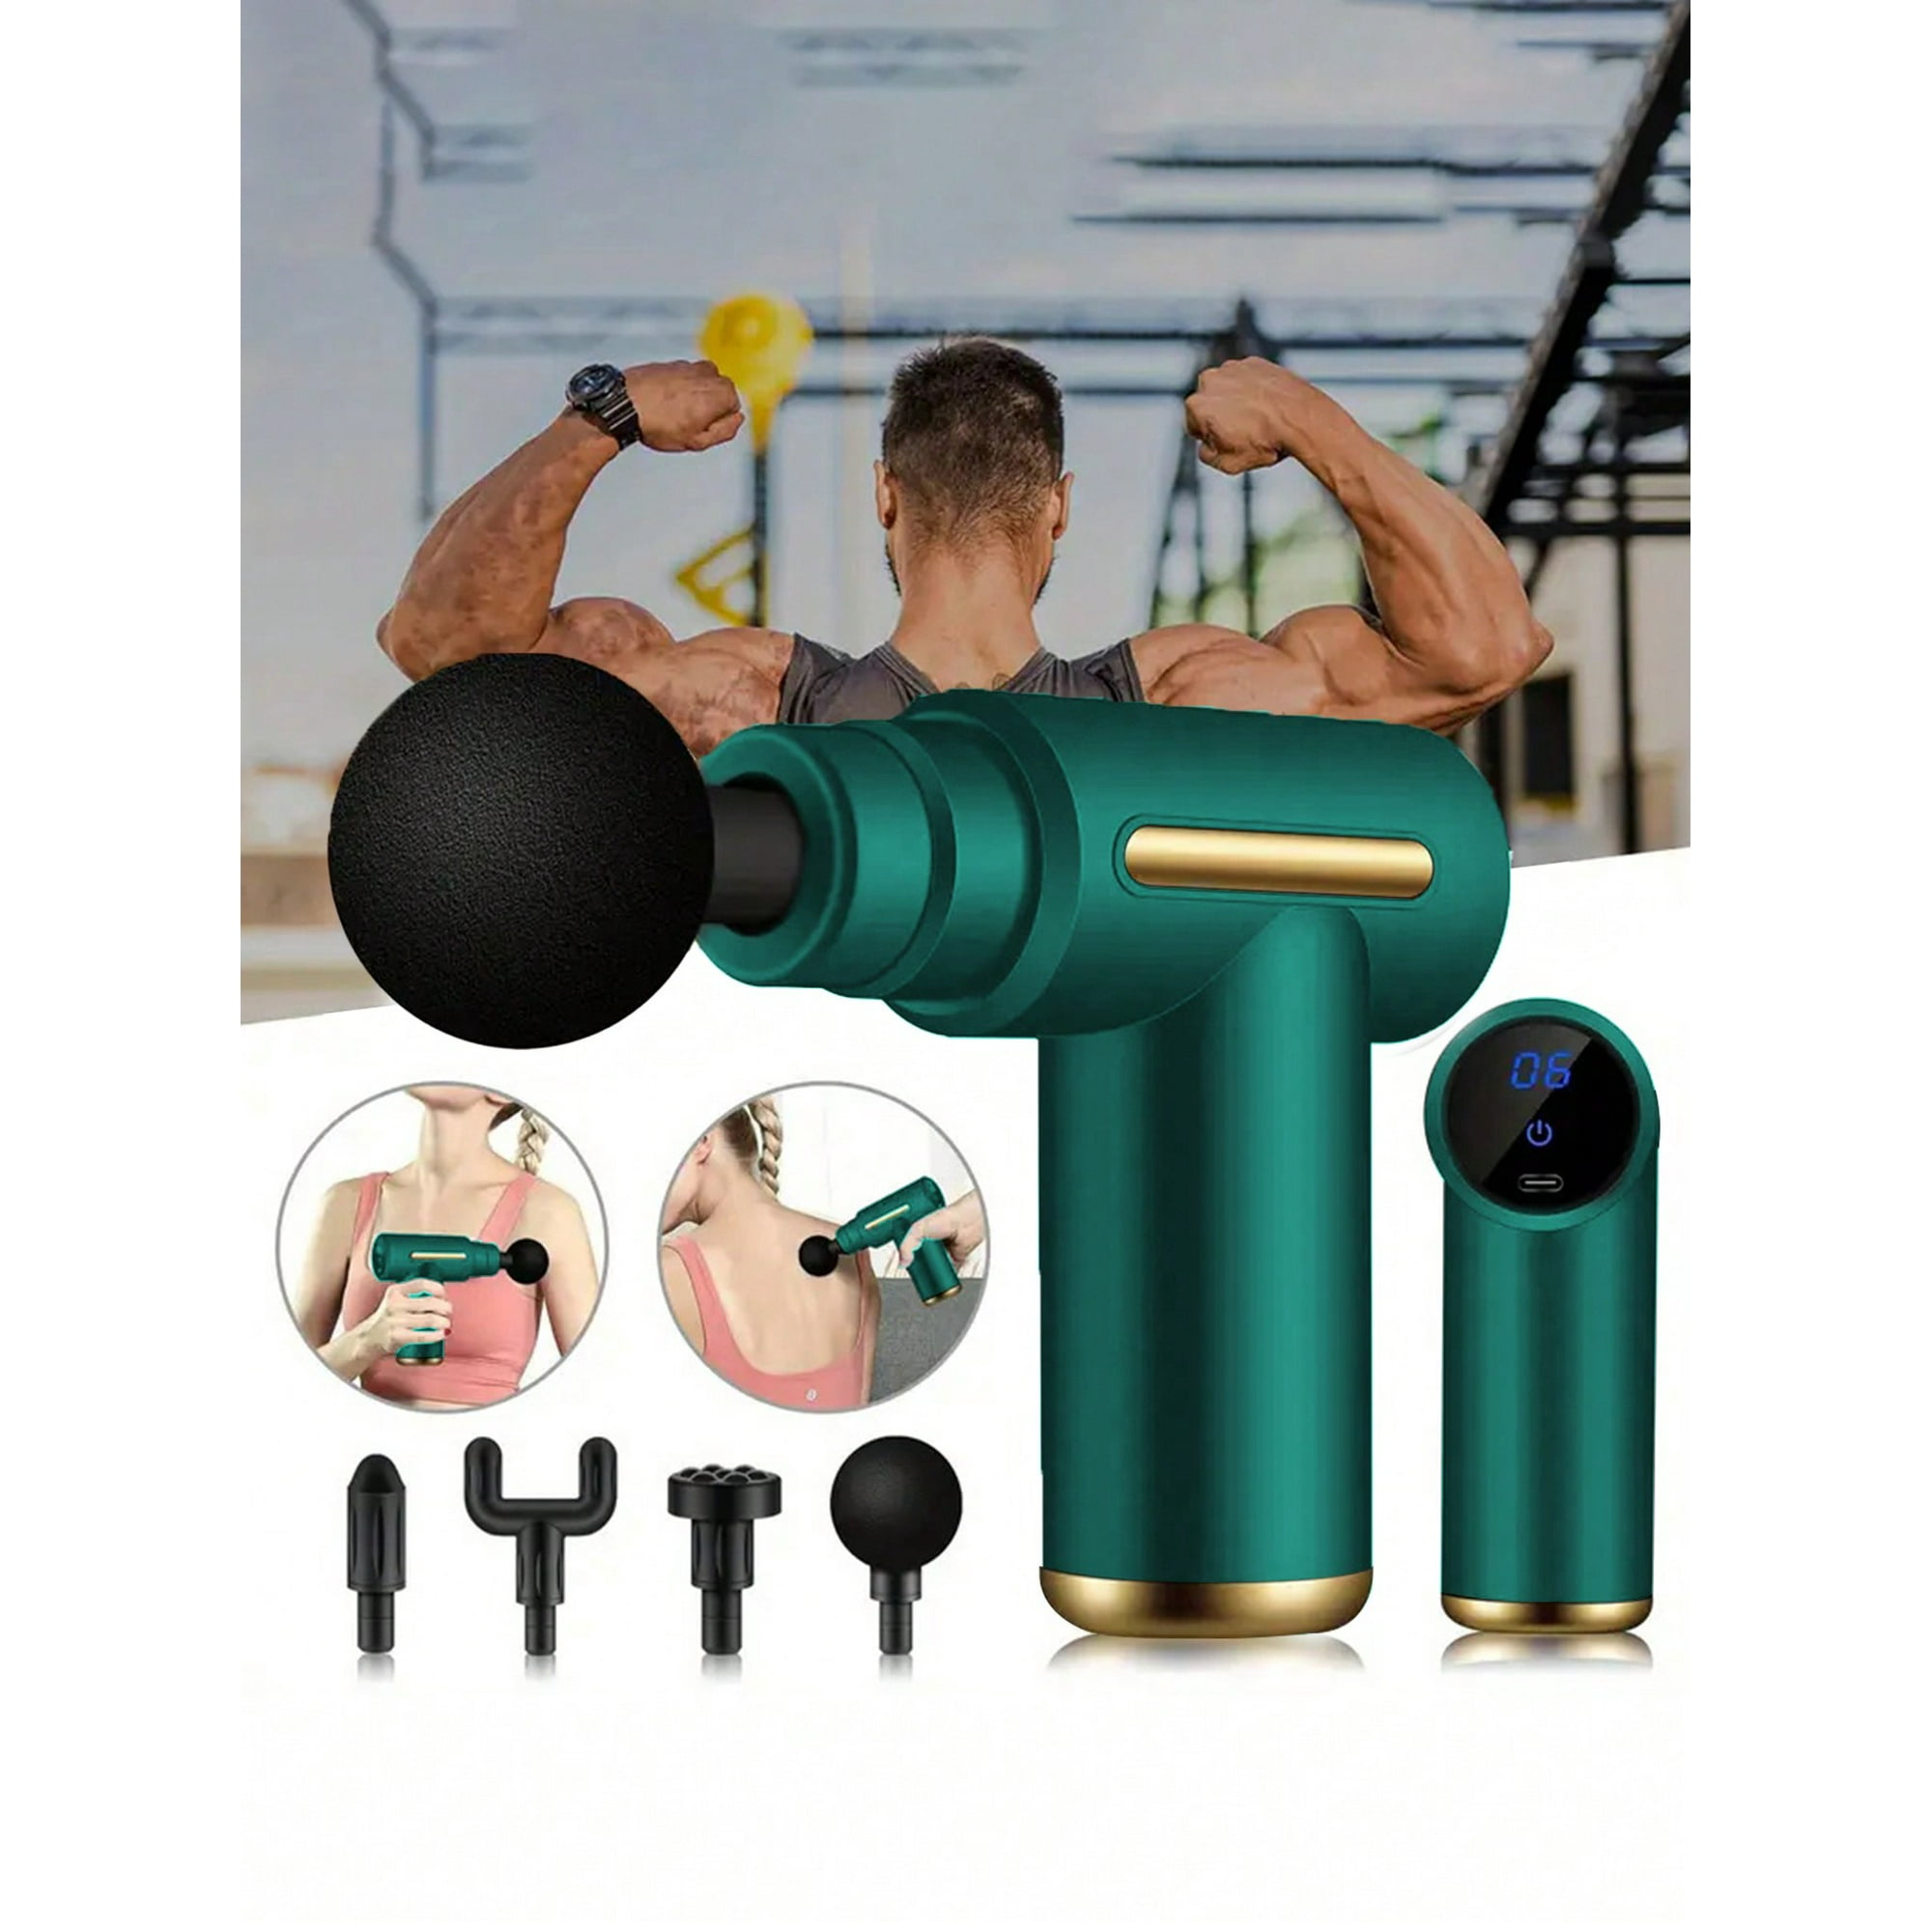 1pc rechargeable lcd massage gun, muscle relax electric massager gun with 6 adjustable intensity levels and 4 heads, portable handheld multi-Function